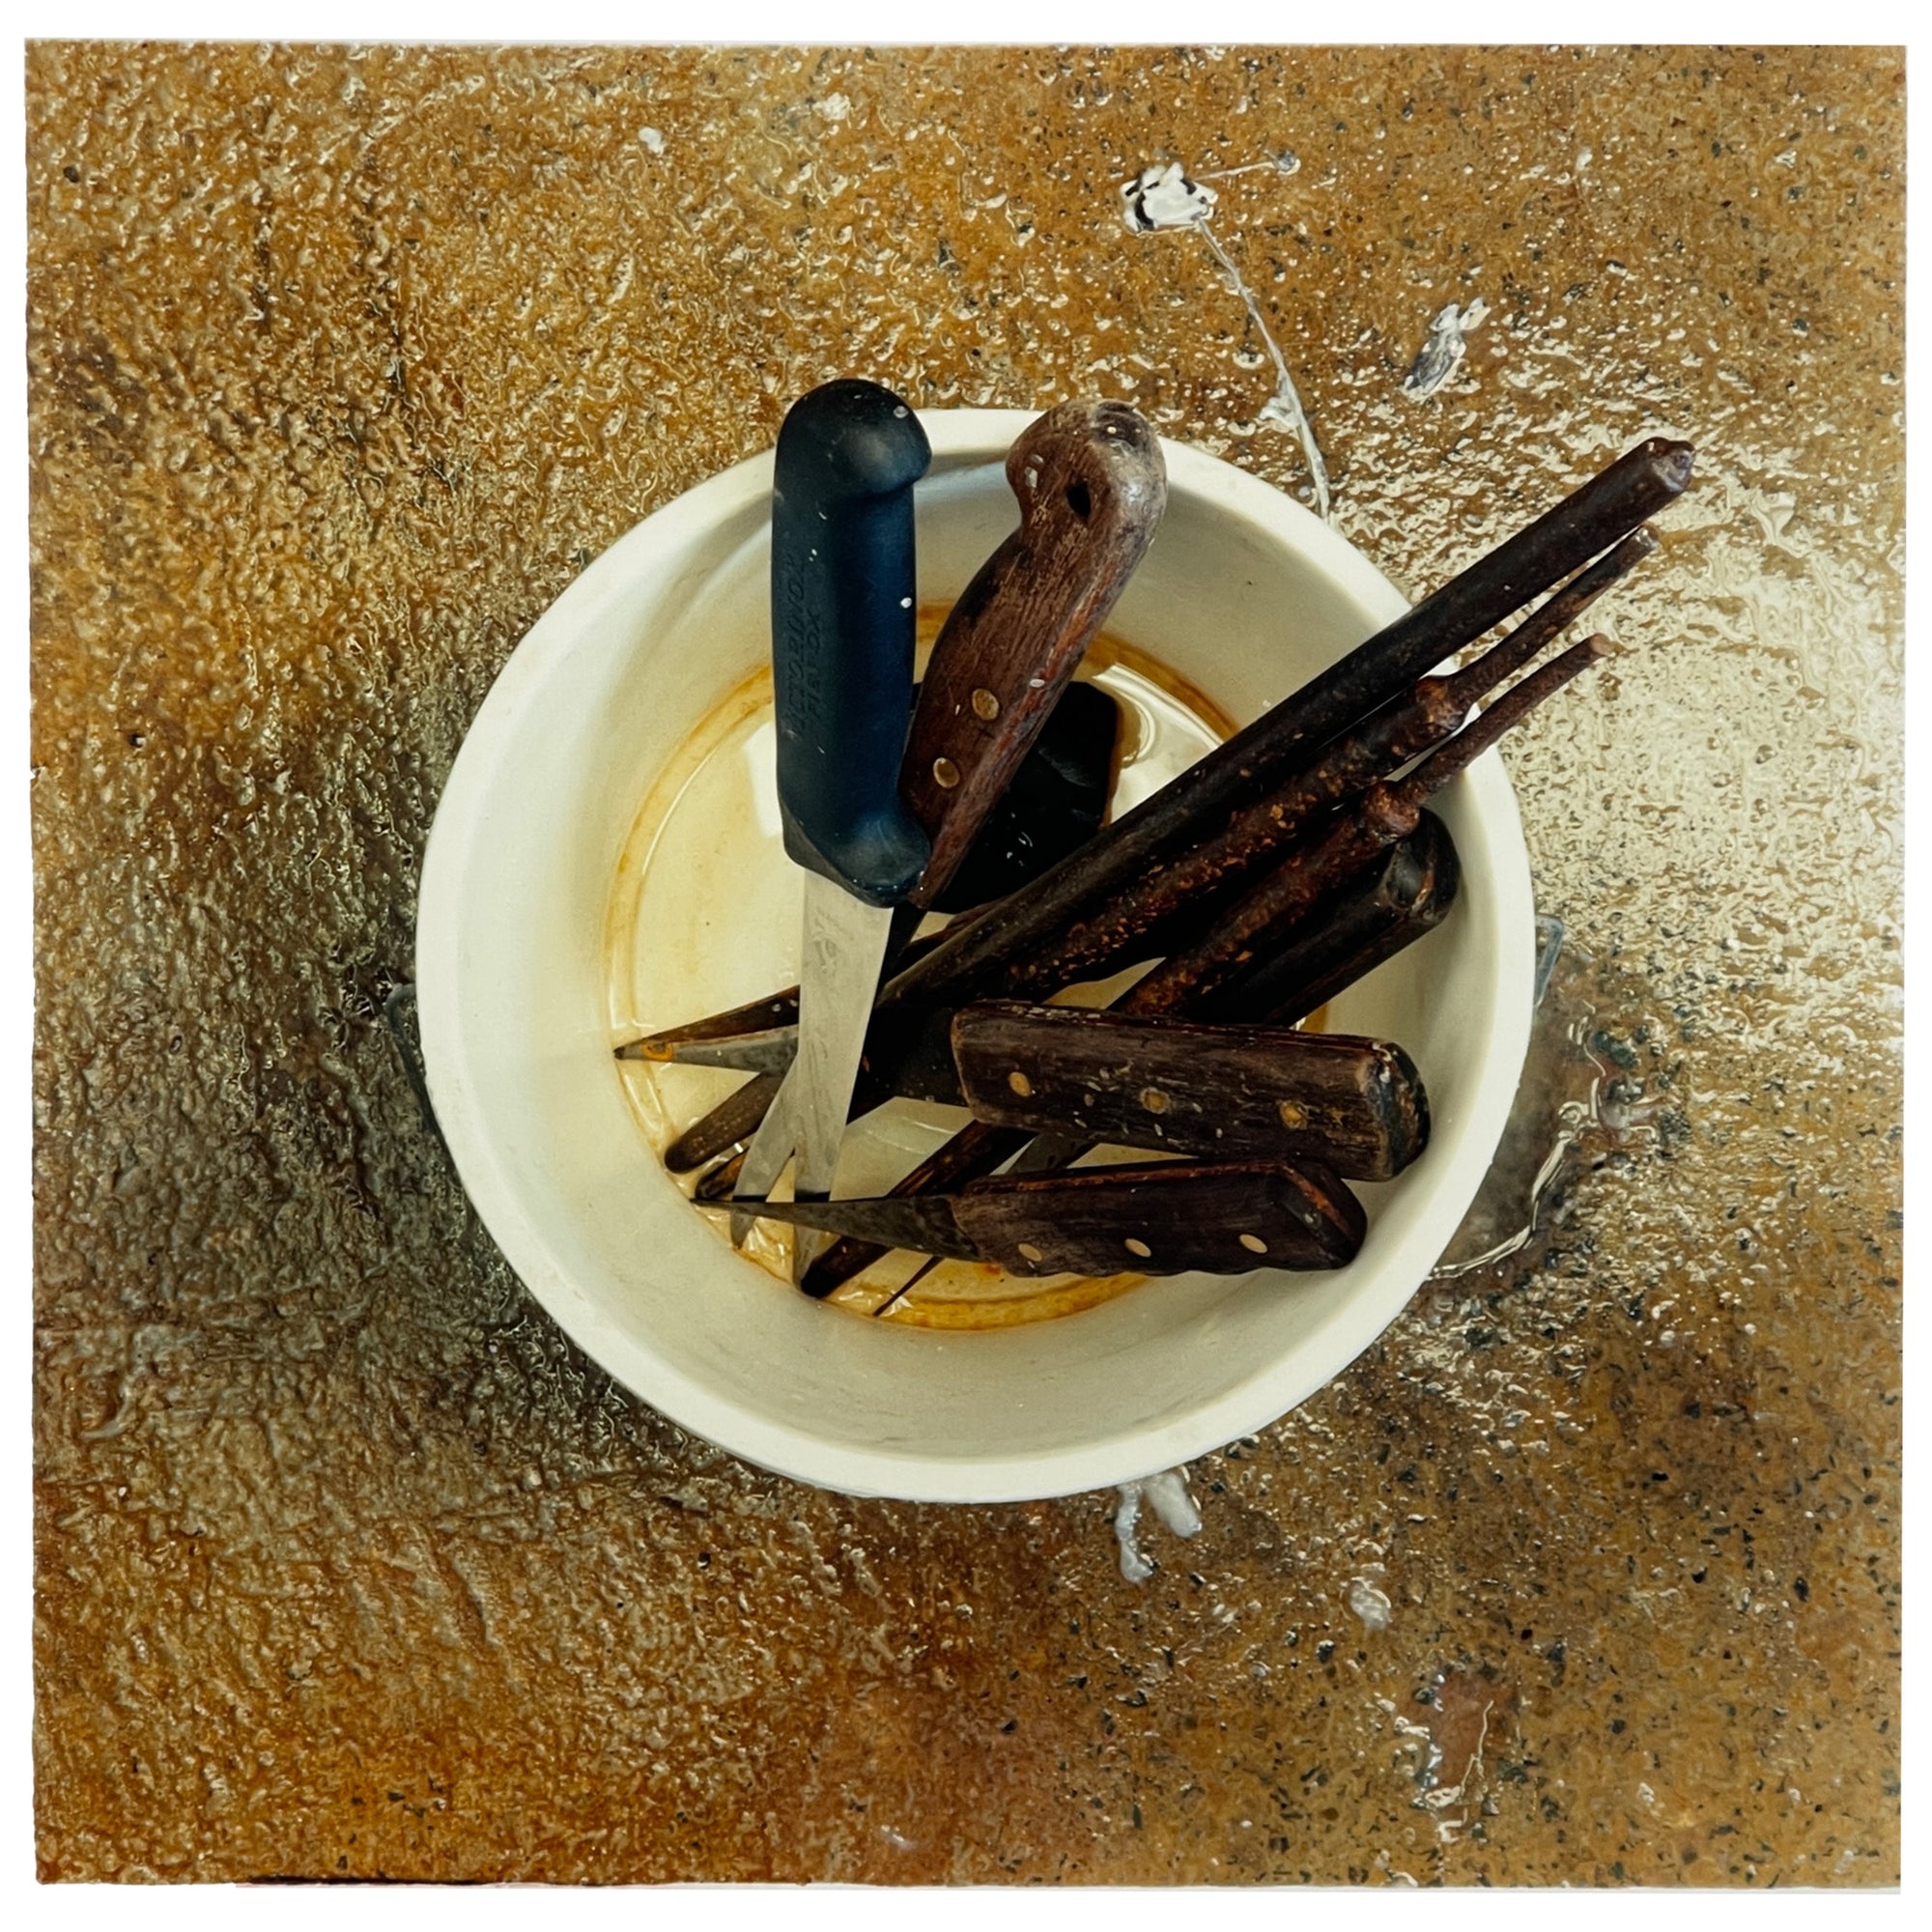 Photograph by Richard Heeps. A pot of filleters knives sits in the middle of a brown-mottled glass work surface.